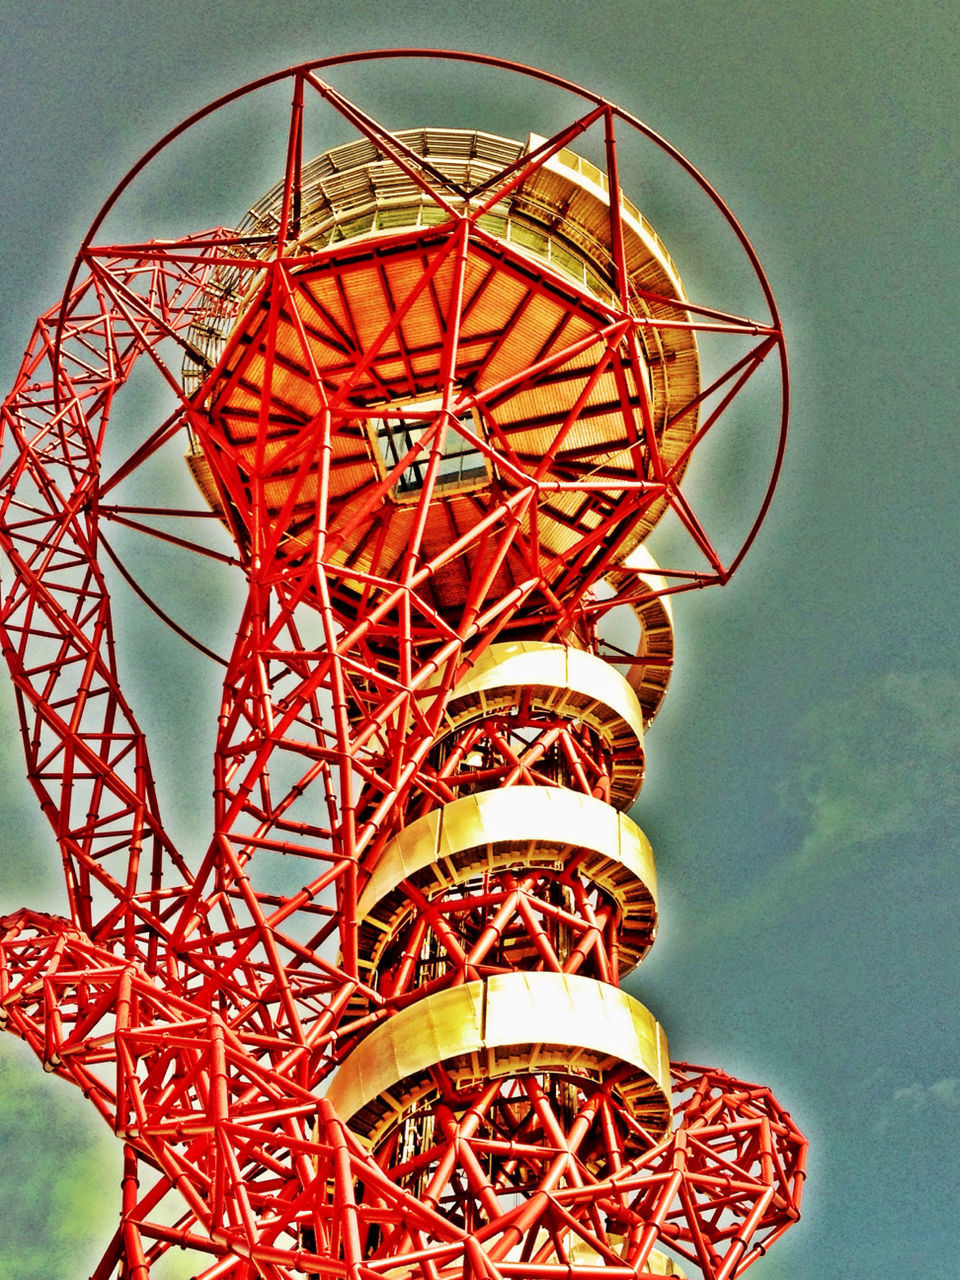 low angle view, amusement park ride, amusement park, arts culture and entertainment, ferris wheel, clear sky, red, sky, built structure, metal, architecture, pattern, day, outdoors, large, no people, tower, design, fun, multi colored